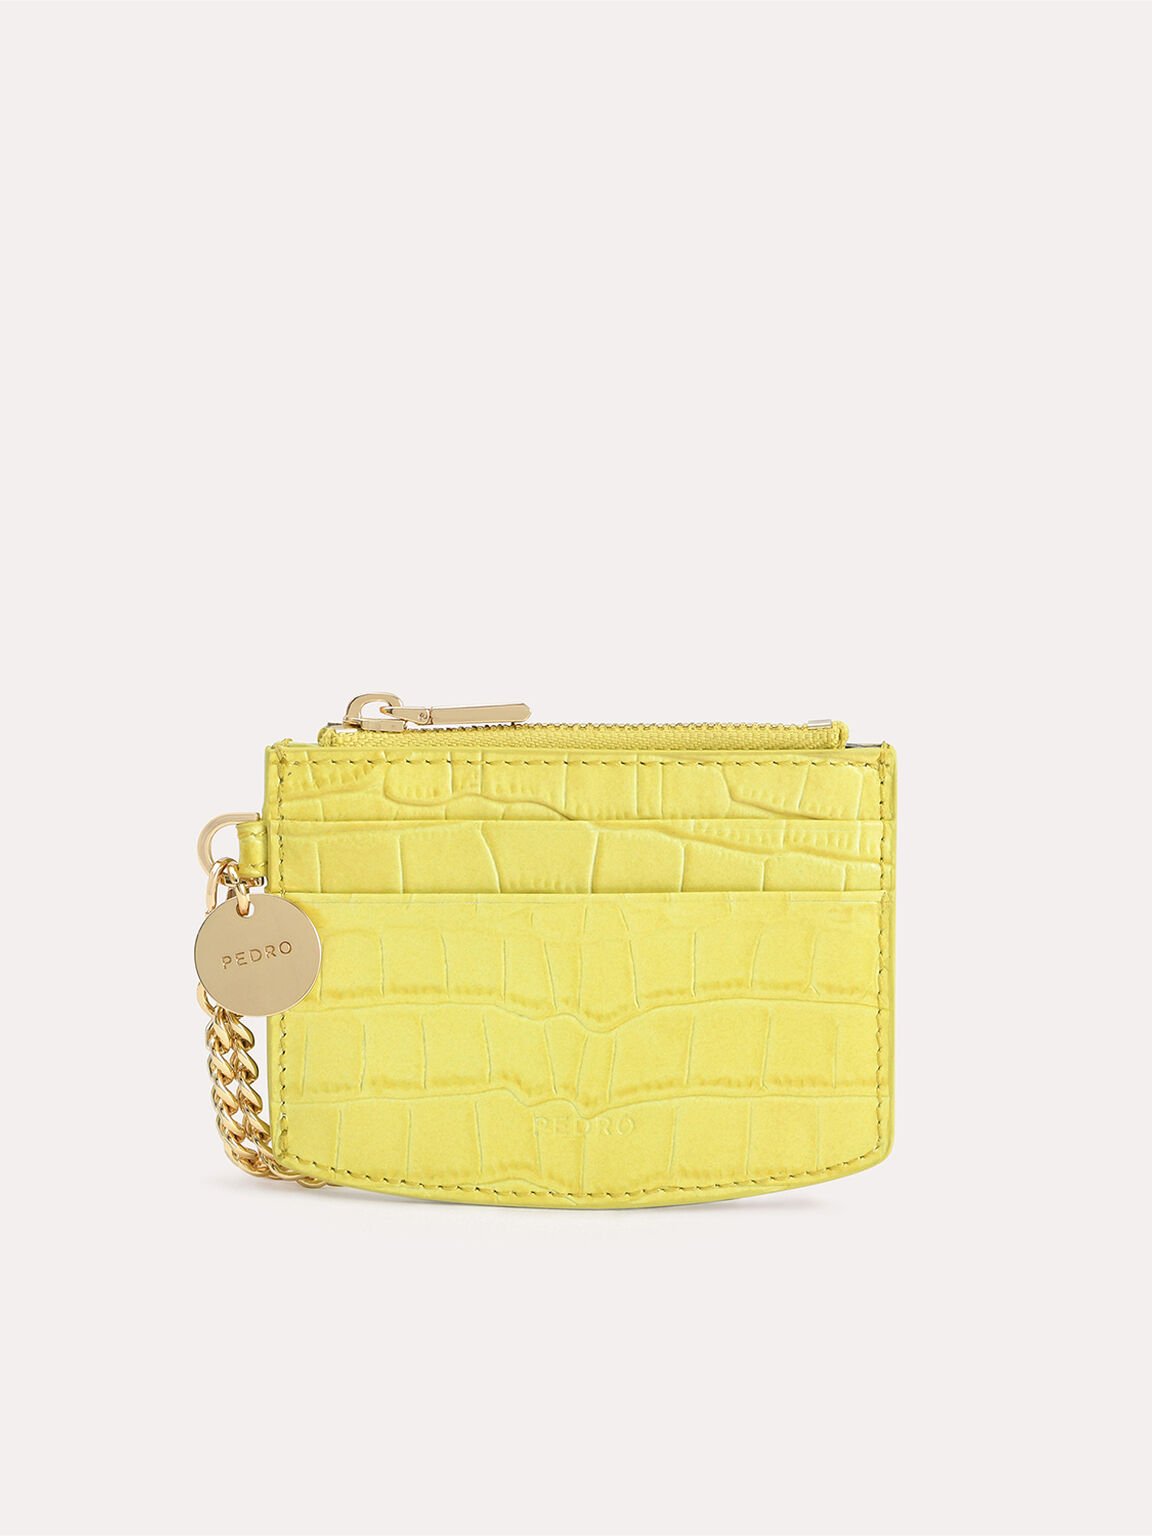 Textured Leather Cardholder, Yellow